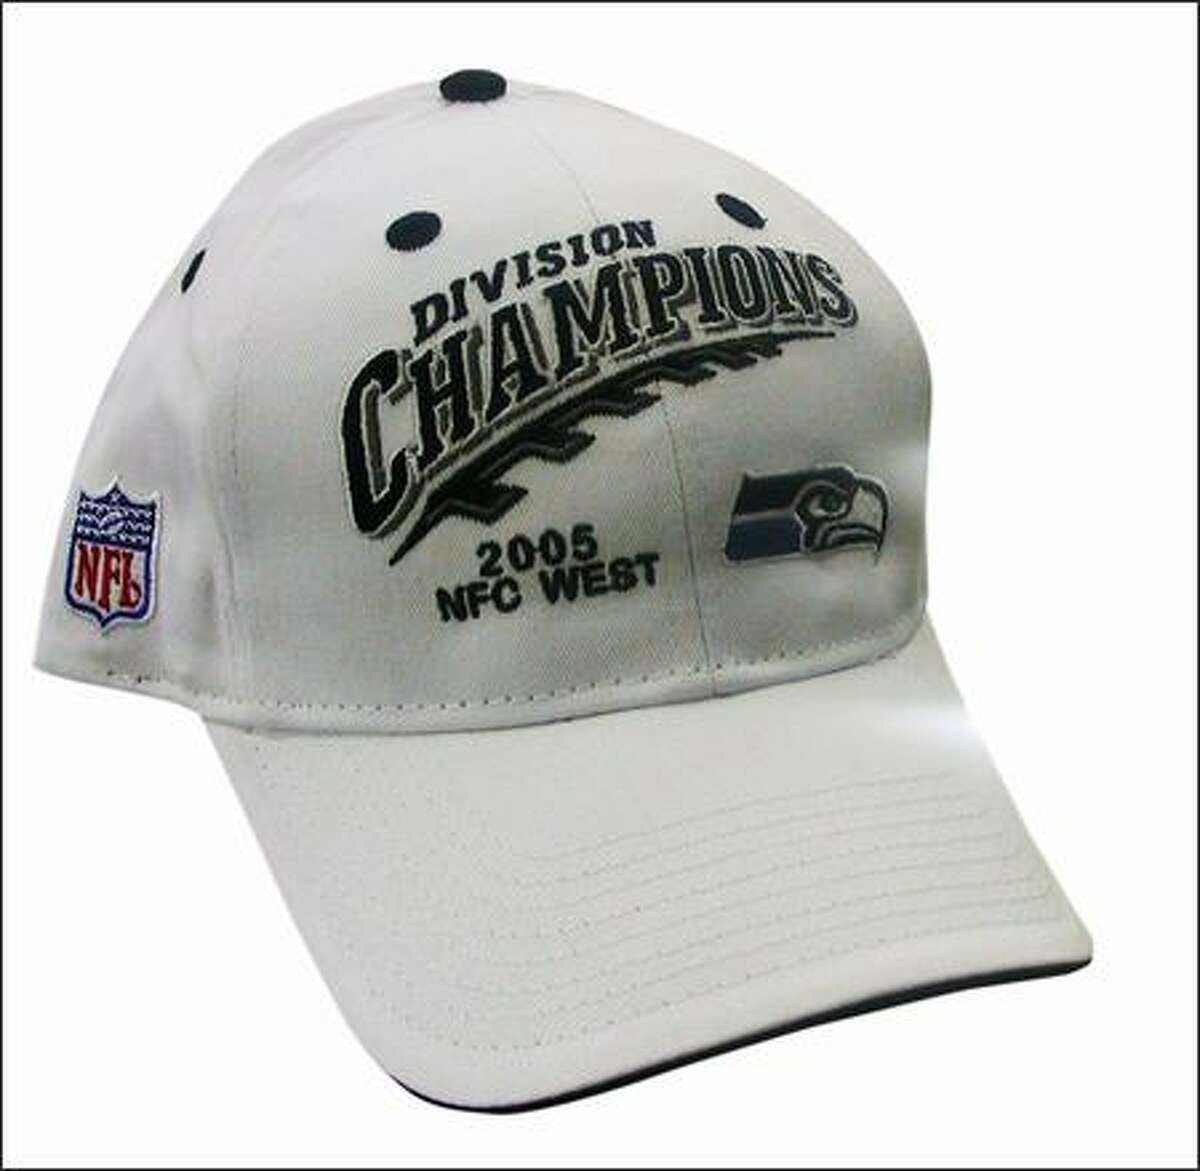 NFC Division Champions 2005 cap, $21.99 - "This is like a trophy you can wear," says the man who owns approximately 150 sports caps. "It’s what your team has already accomplished this year - and that won’t change, no matter what." Shaun Alexander onesie, $30 - According to Jim: "Cute." Says it all, right?